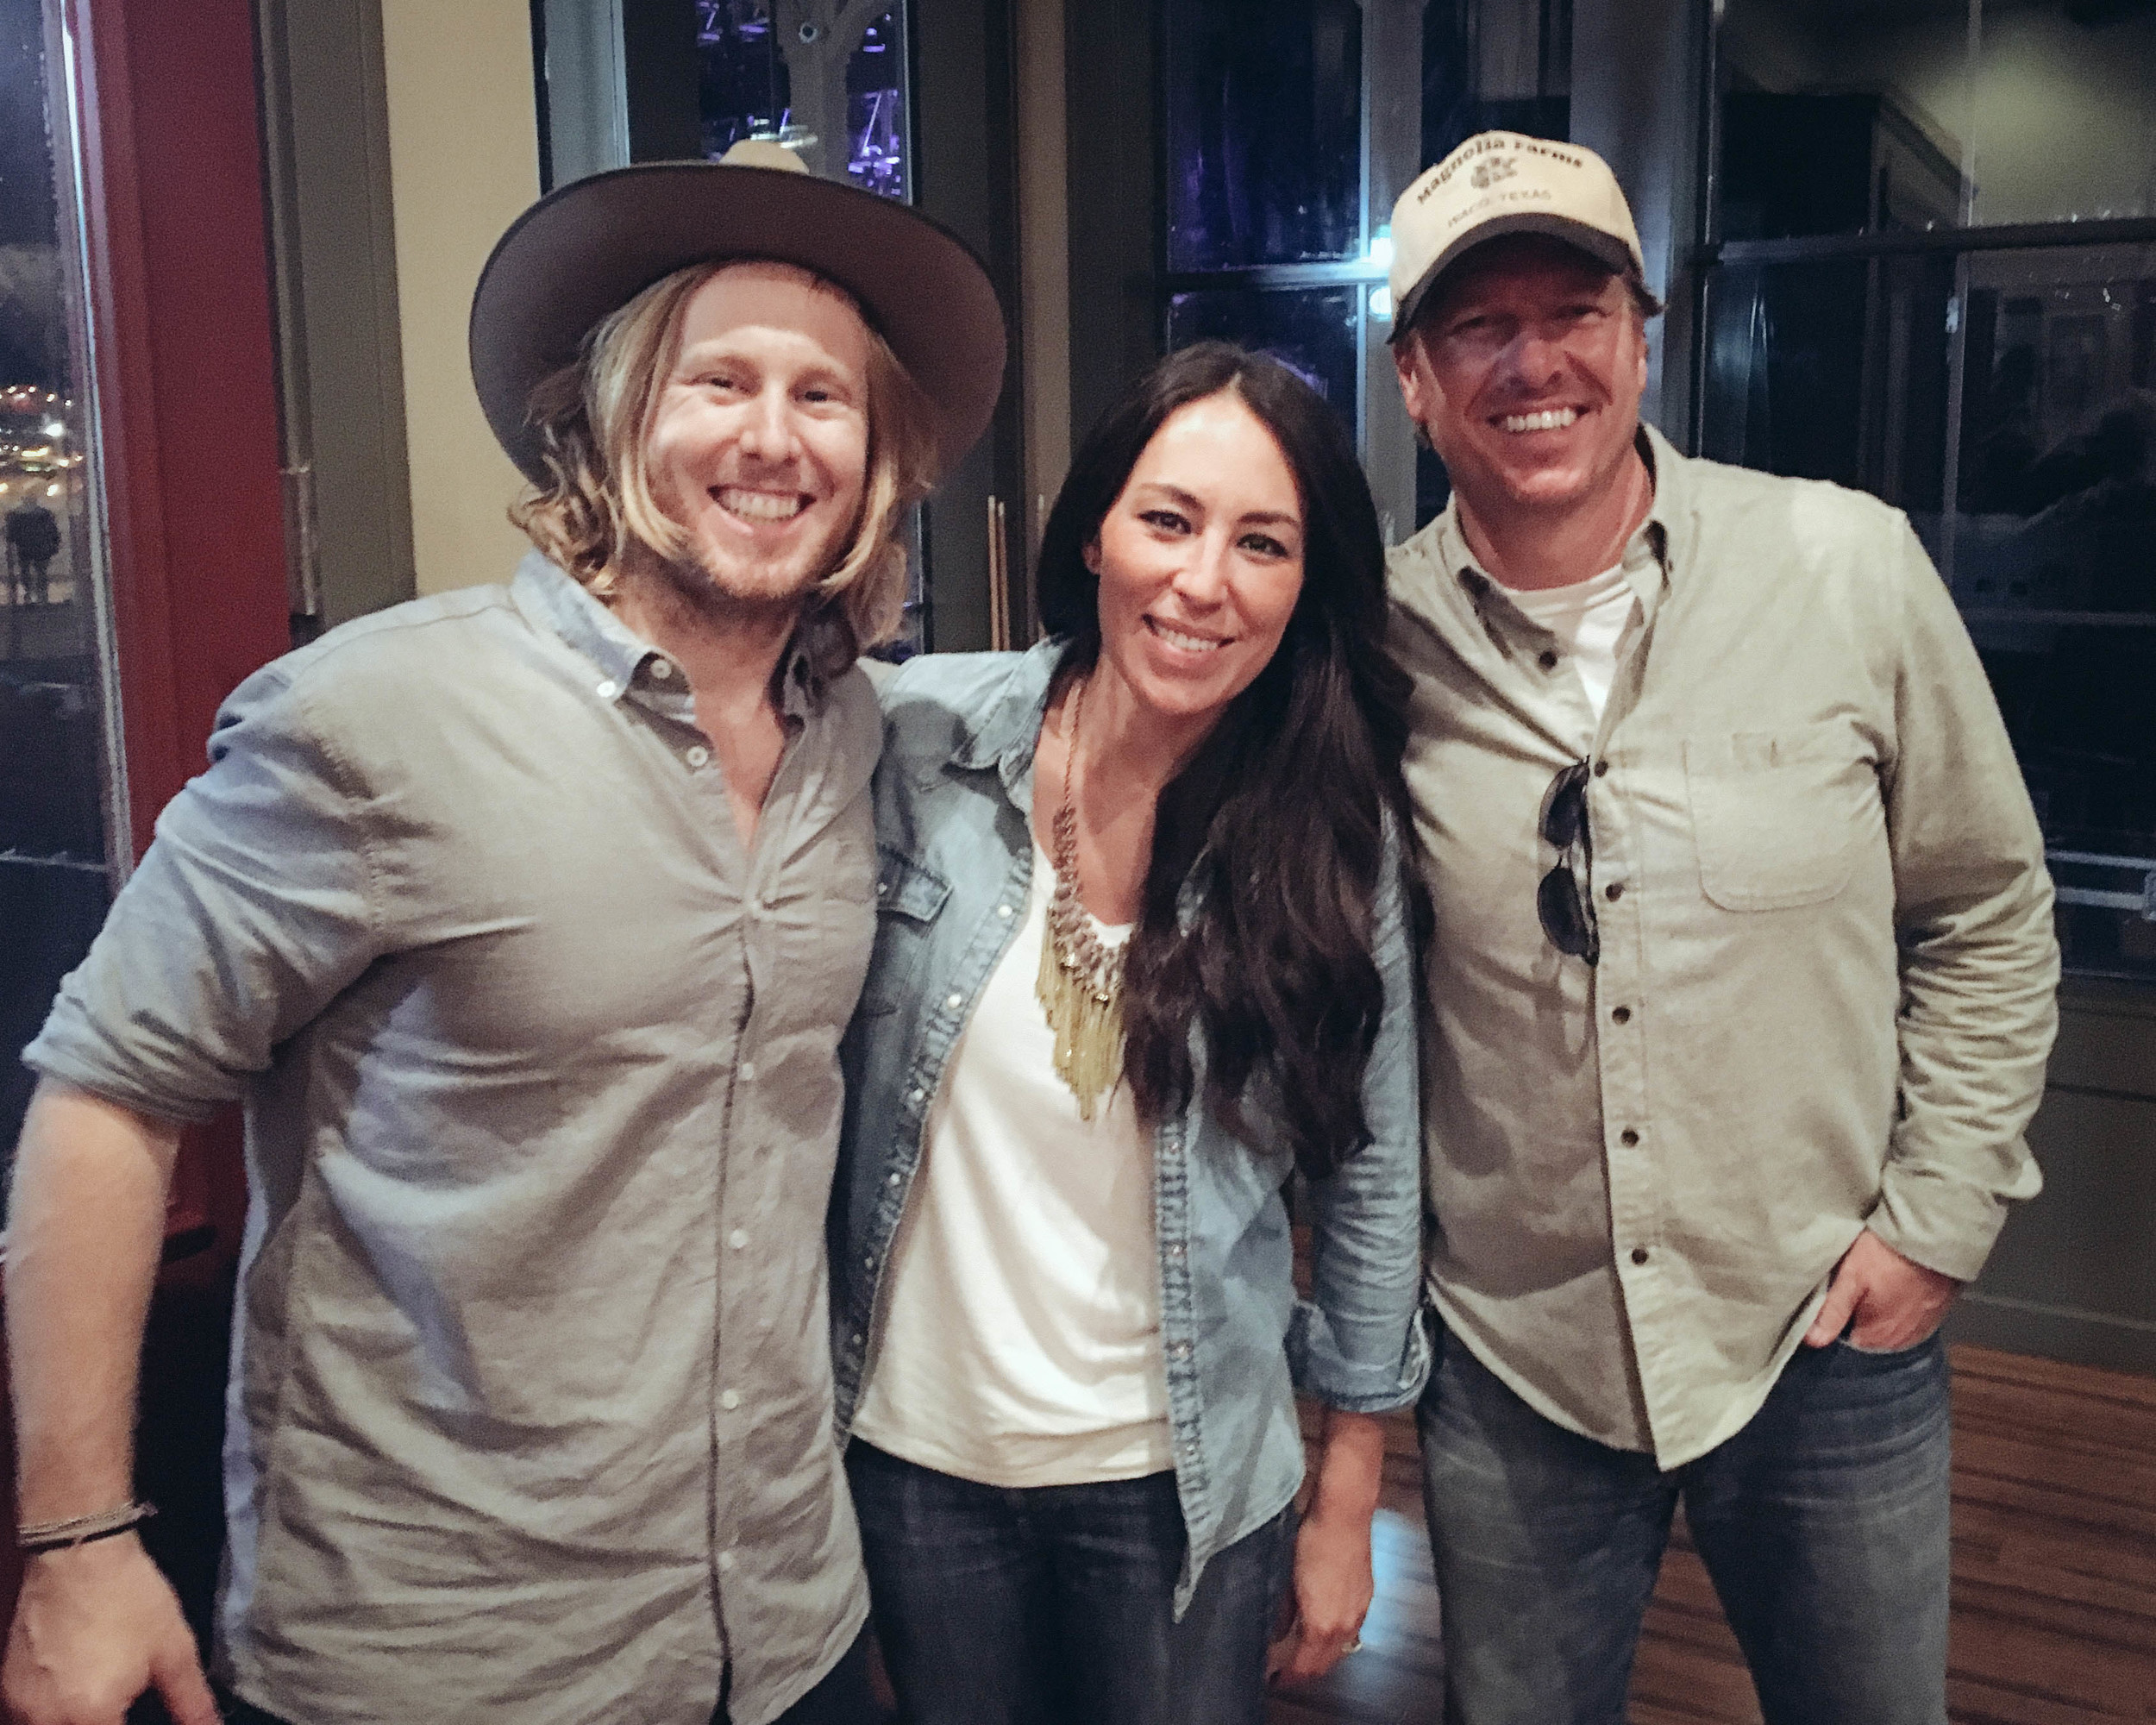  Chip &amp; Joanna were backstage at Willy's Ranch. Loved chatting w/ them after we got done playing.&nbsp; 